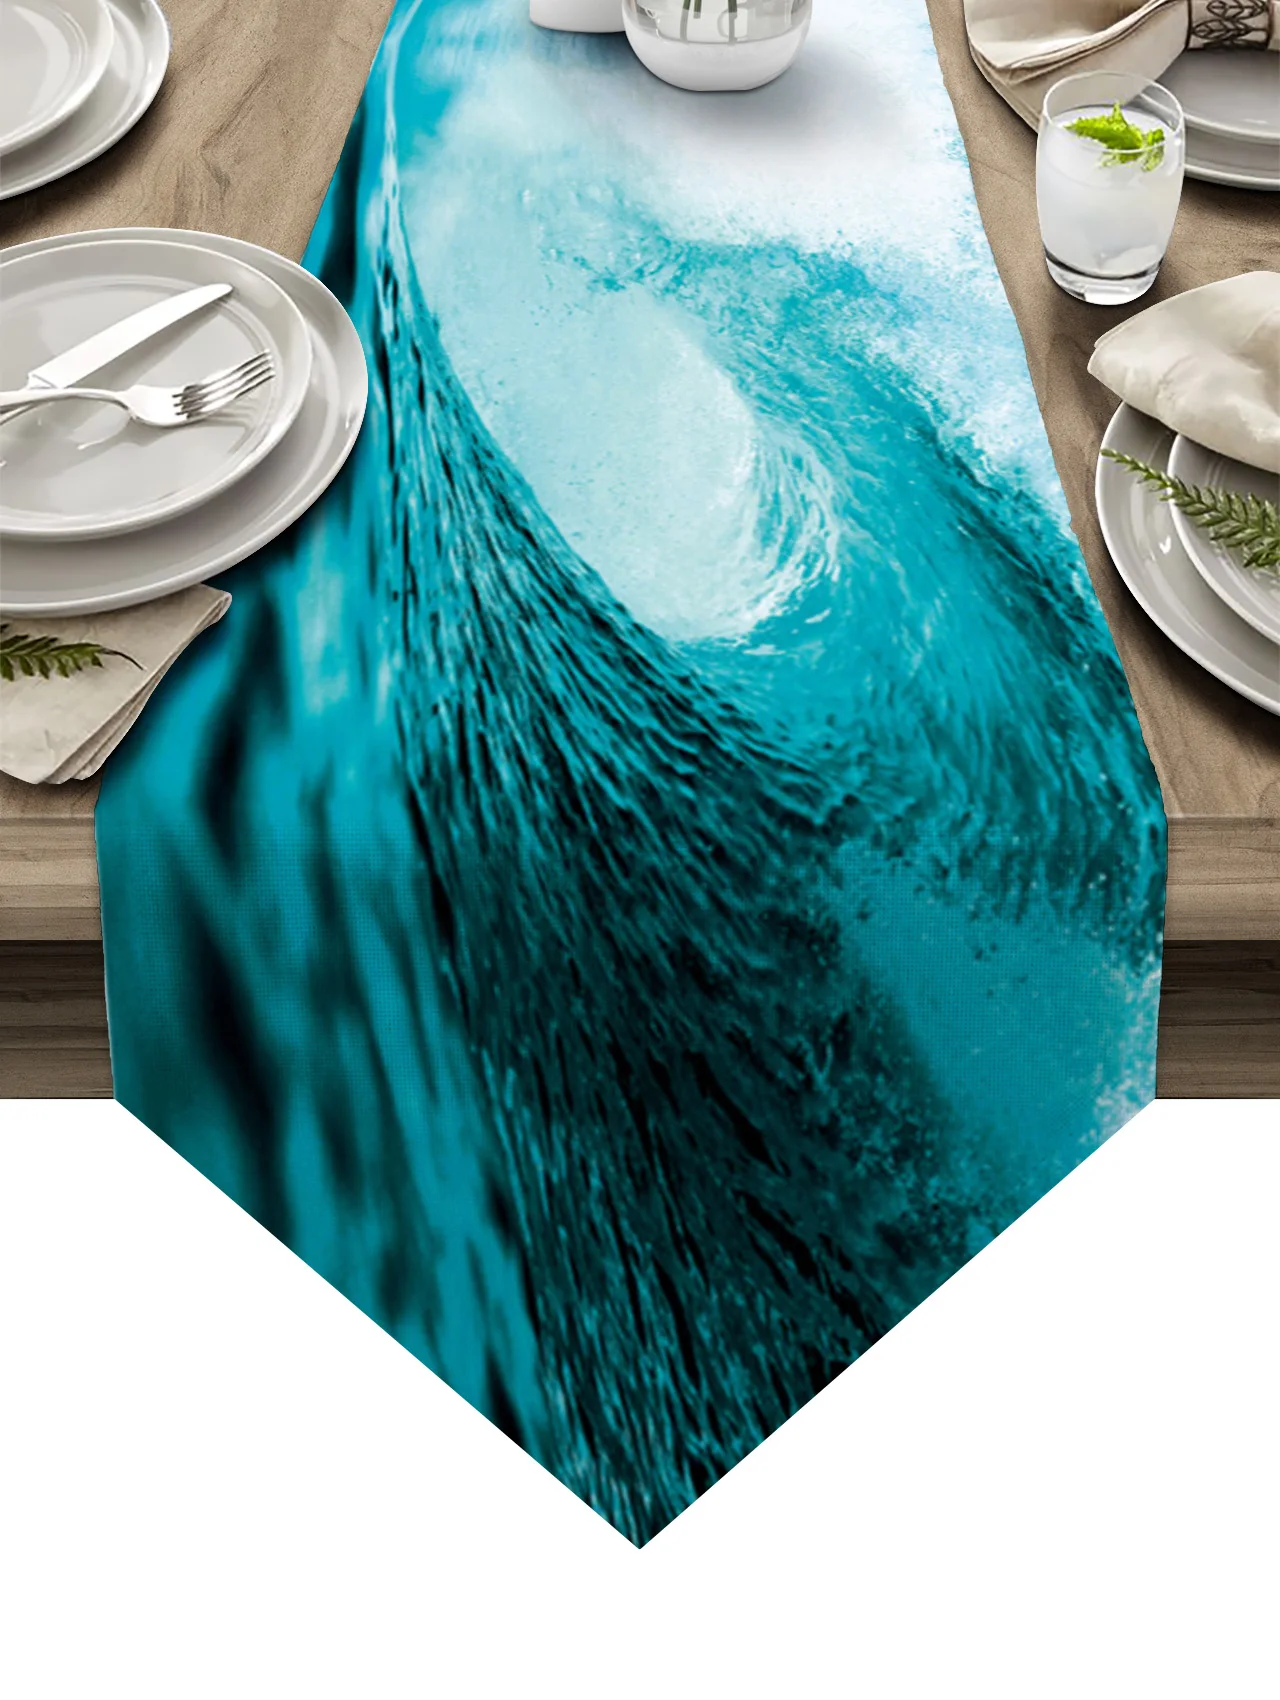 

Cyan Waves Seascape Summer Oil Painting Coffee Table Decor Tablecloth Wedding Decoration Dinning Table Decoration Table Runner